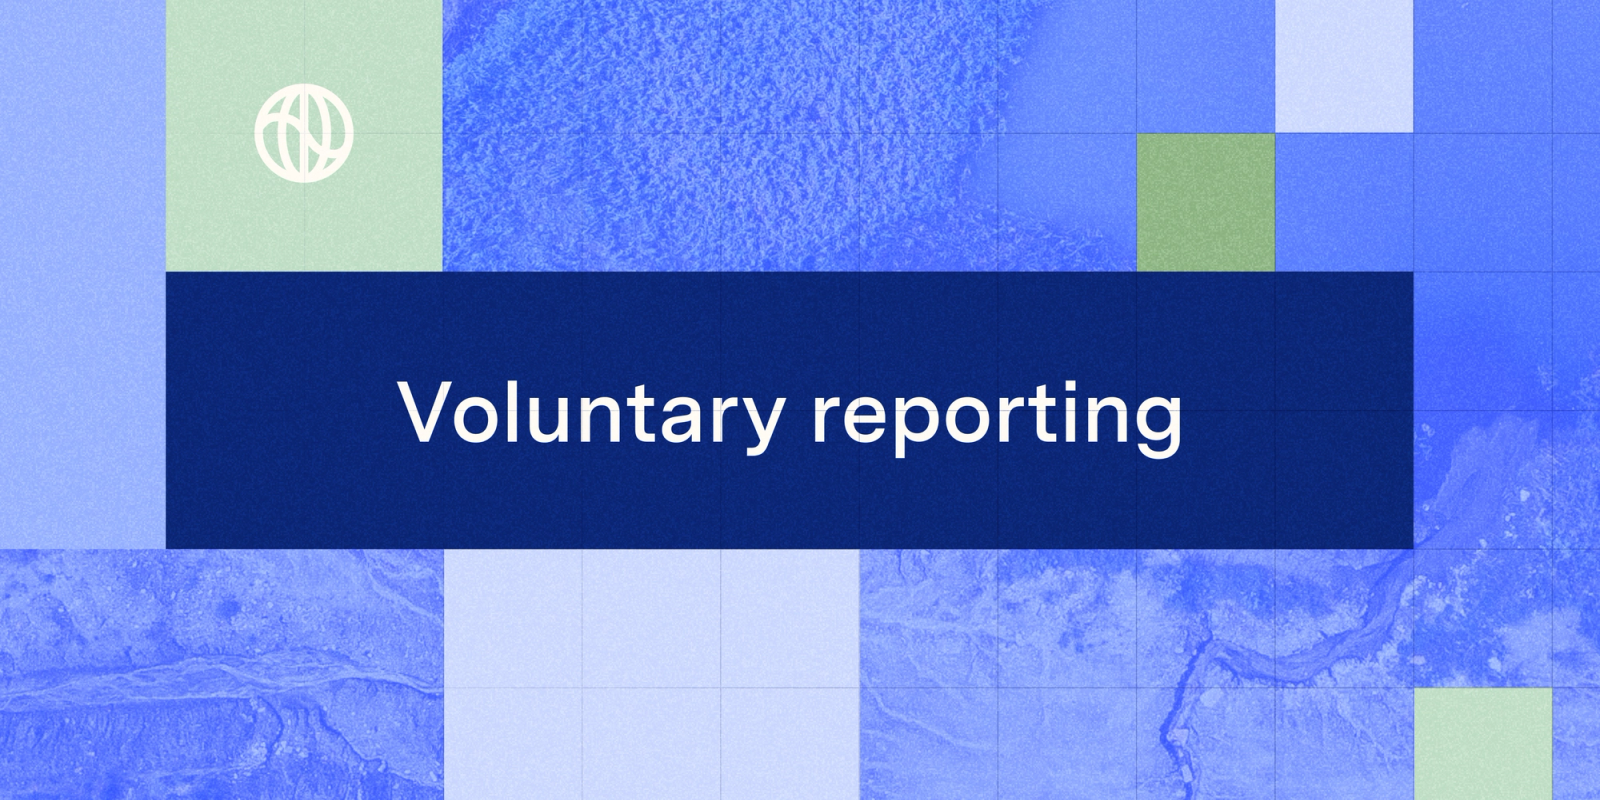 TCFD, CDP, GRI…where should you start when it comes to voluntary reporting?